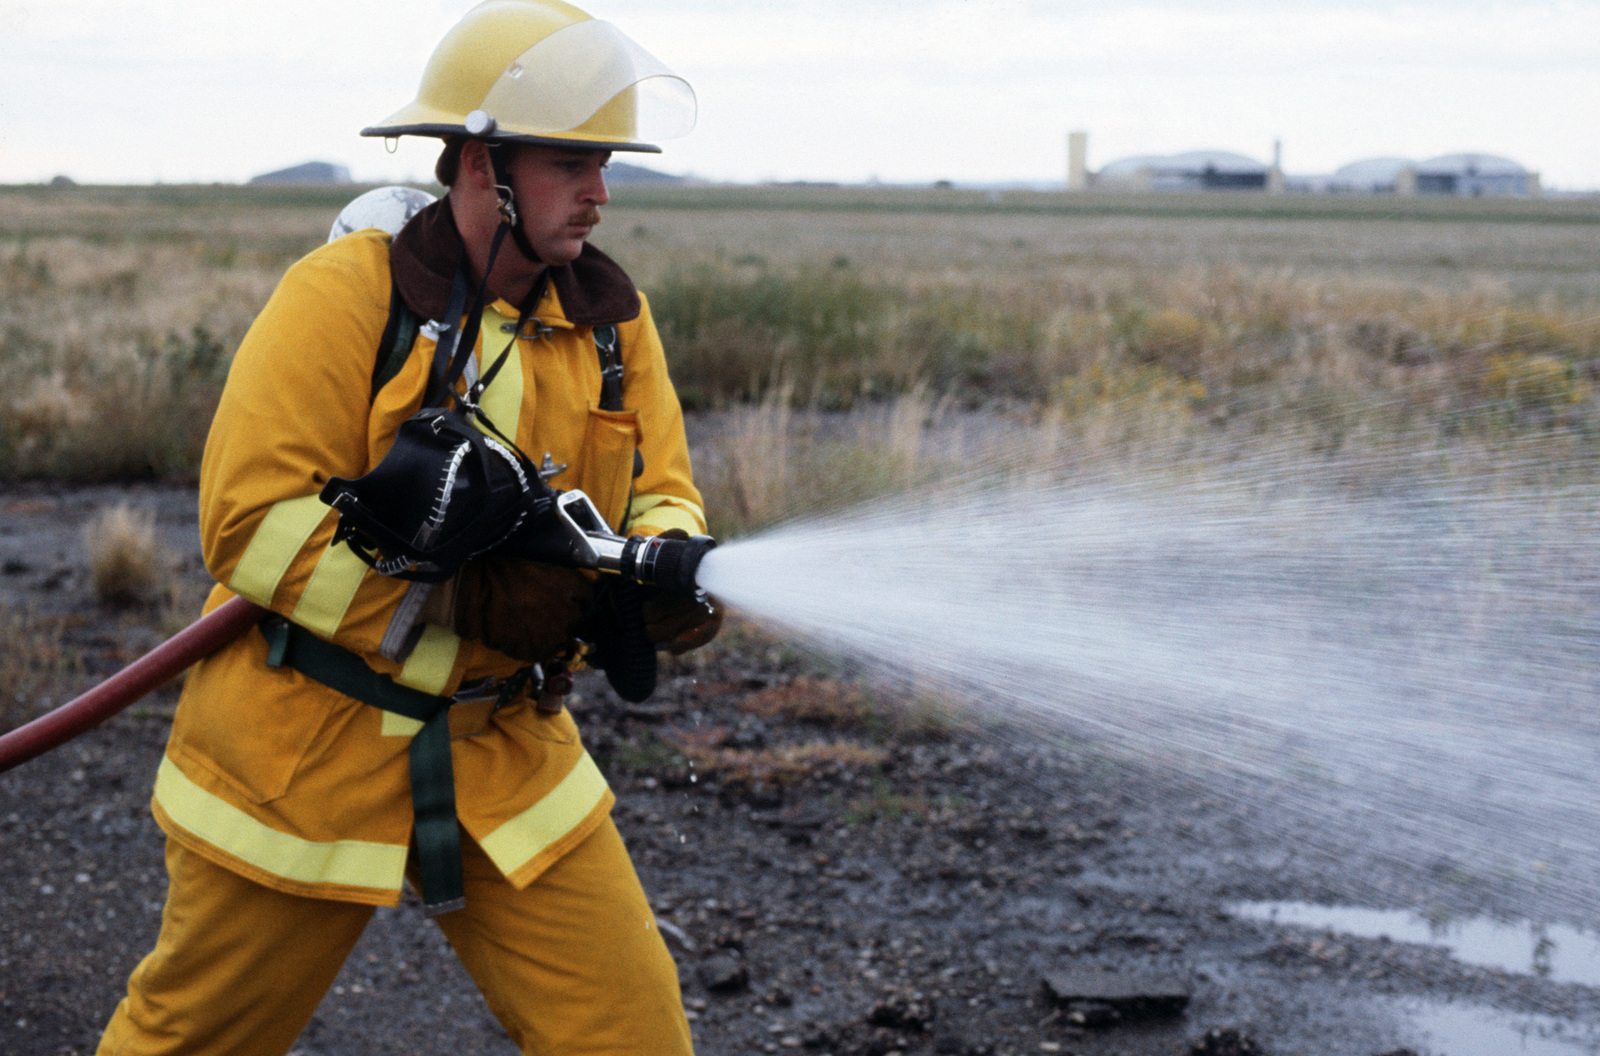 A firefighter holding a water hose during an accident